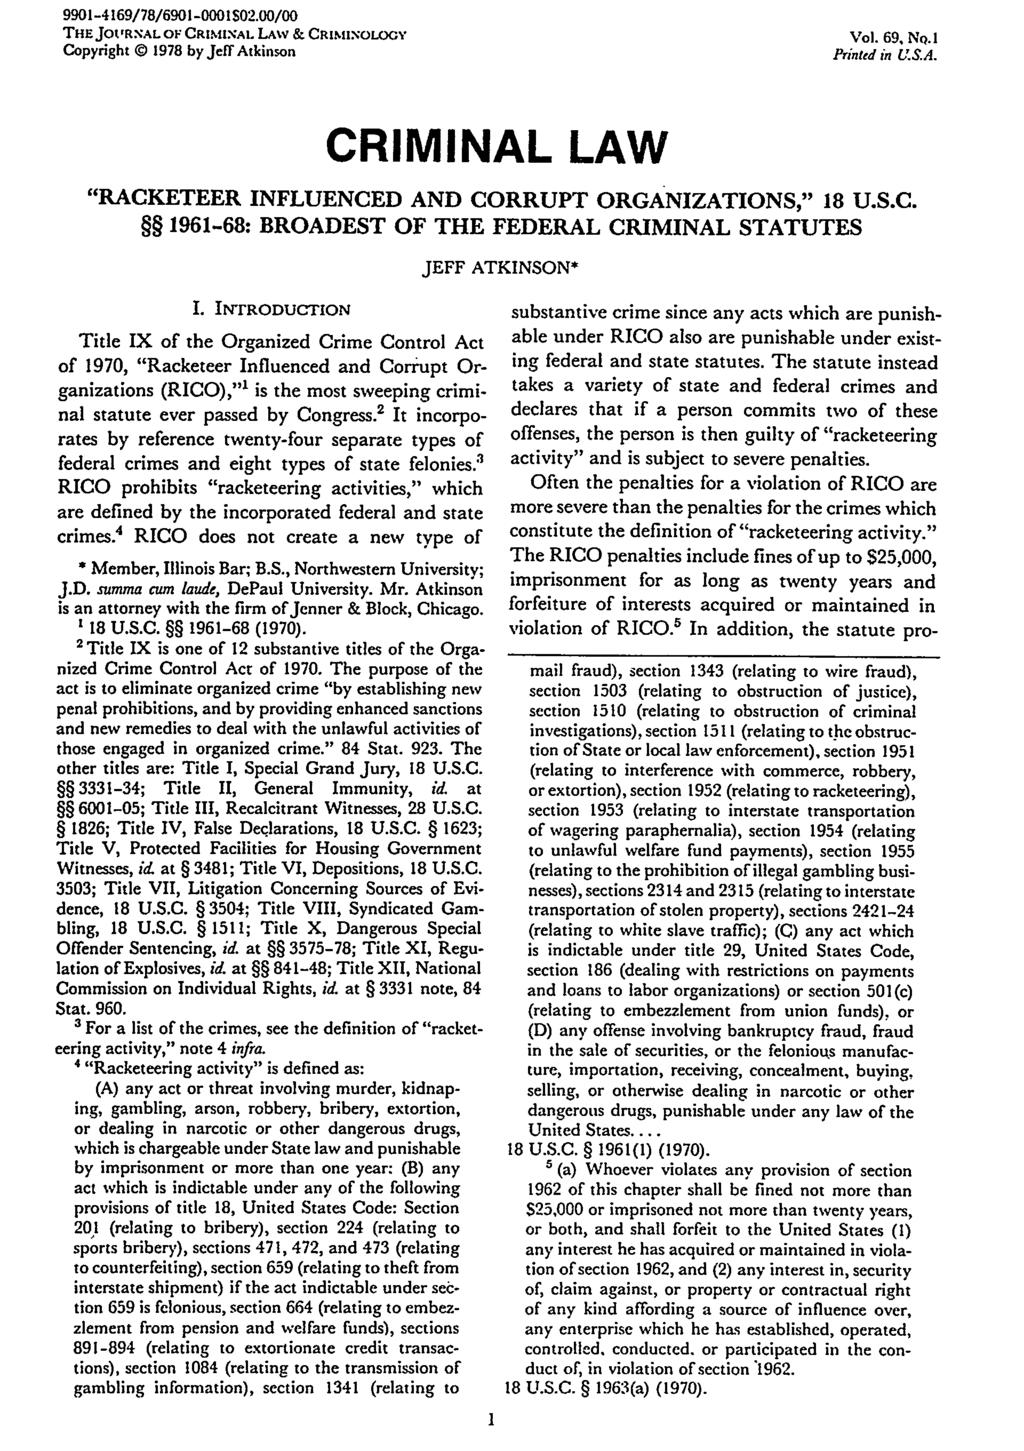 9901-4169/78/6901-0001$02.00/00 THEJOt'RNAL OF CRIMINAL LAW & CRIMINOLOGY Copyright 0 1978 by Jeff Atkinson Vol. 69, NO.1 Printed in US.A. CRIMINAL LAW "RACKETEER INFLUENCED AND CORRUPT ORGANIZATIONS," 18 U.